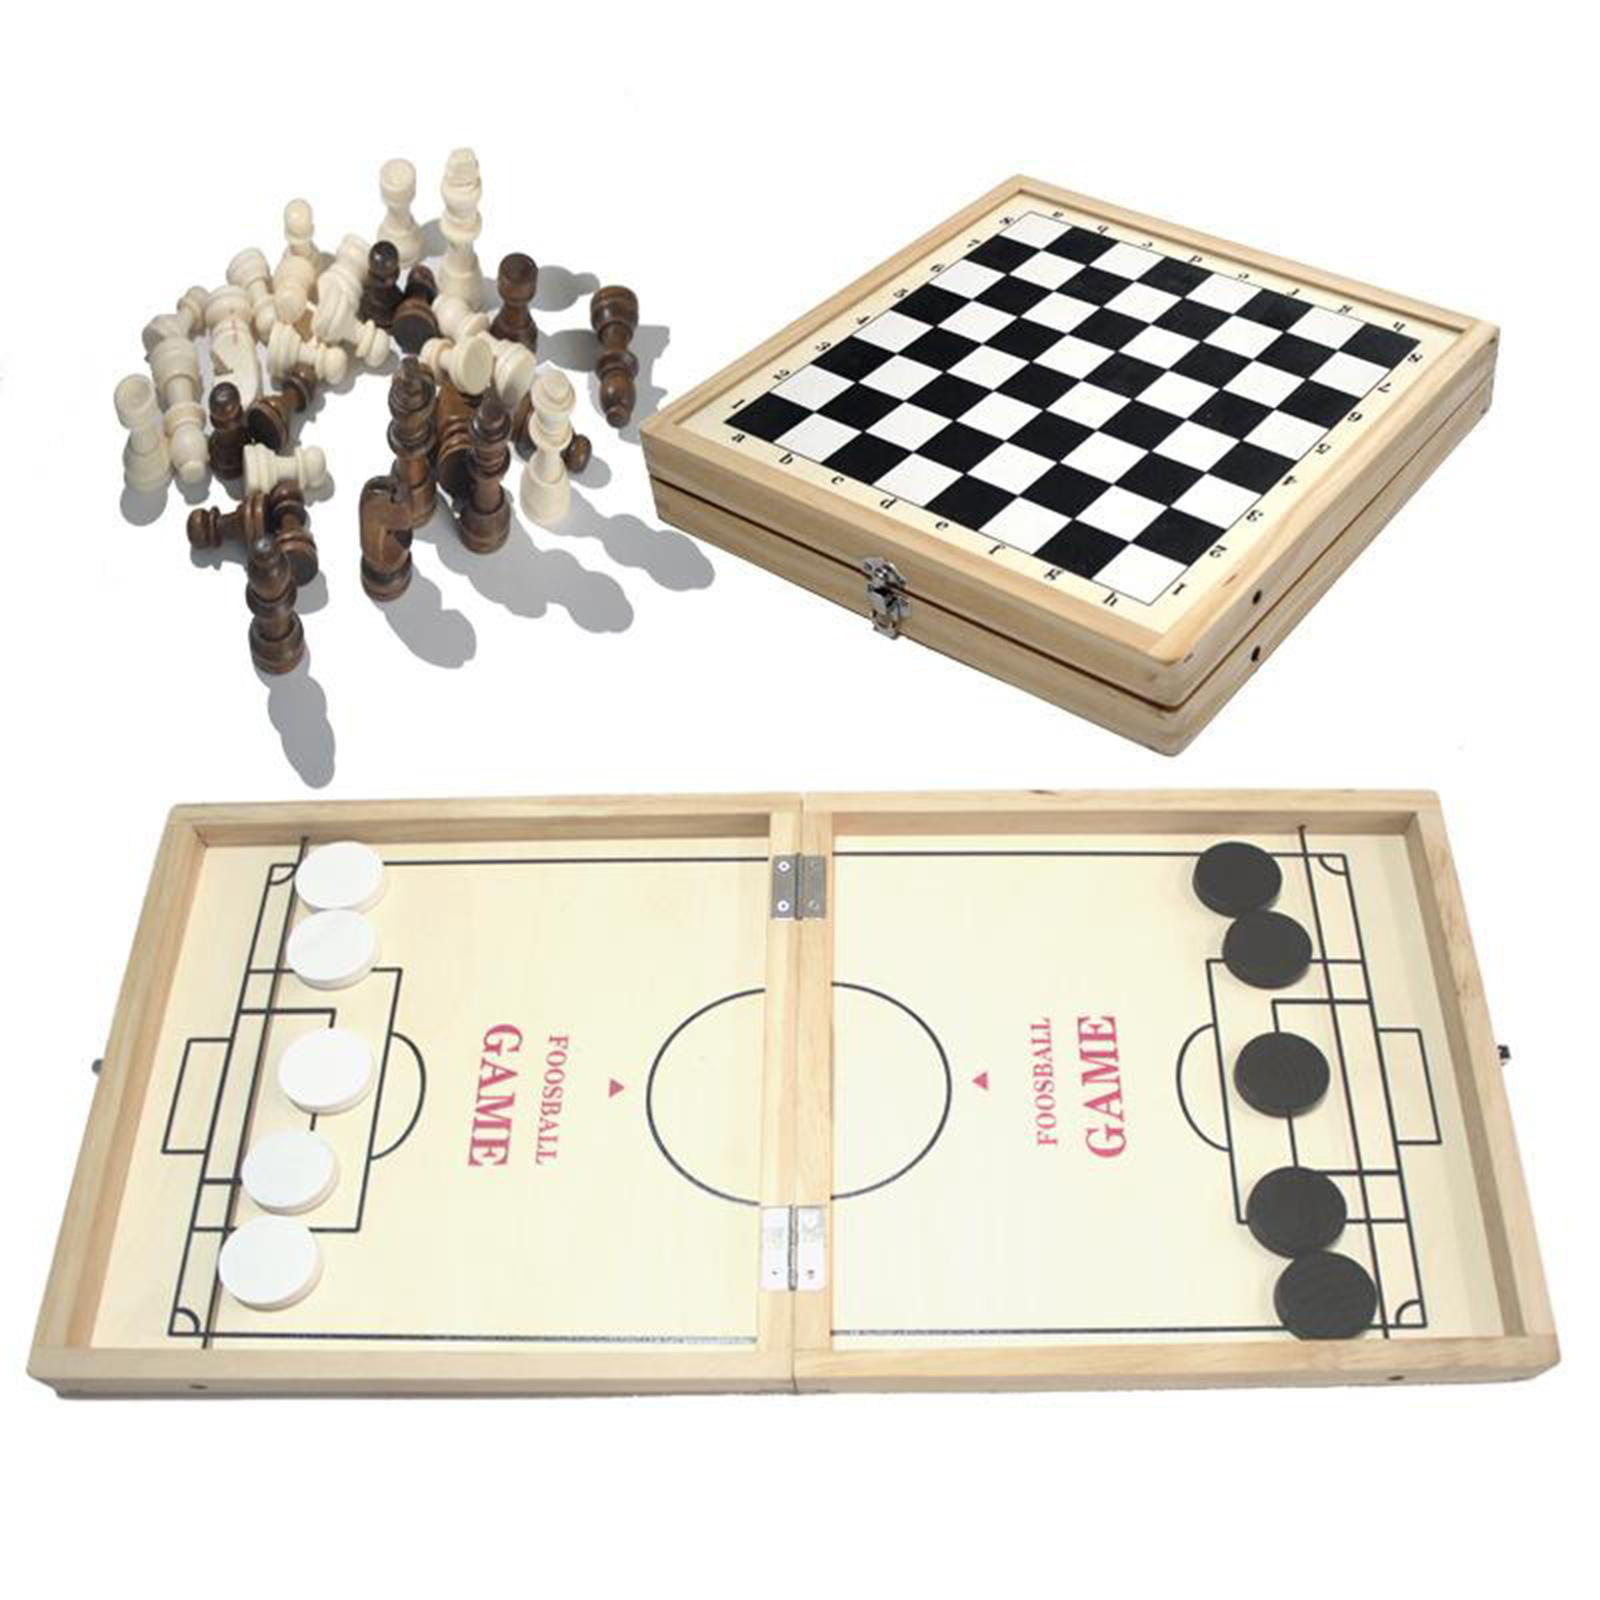  4 Pack Amazing Fun Family Board Games of Backgammon, Card  Shuffler & Cards, Chess Set with A Sling Puck Folding Game. : Toys & Games